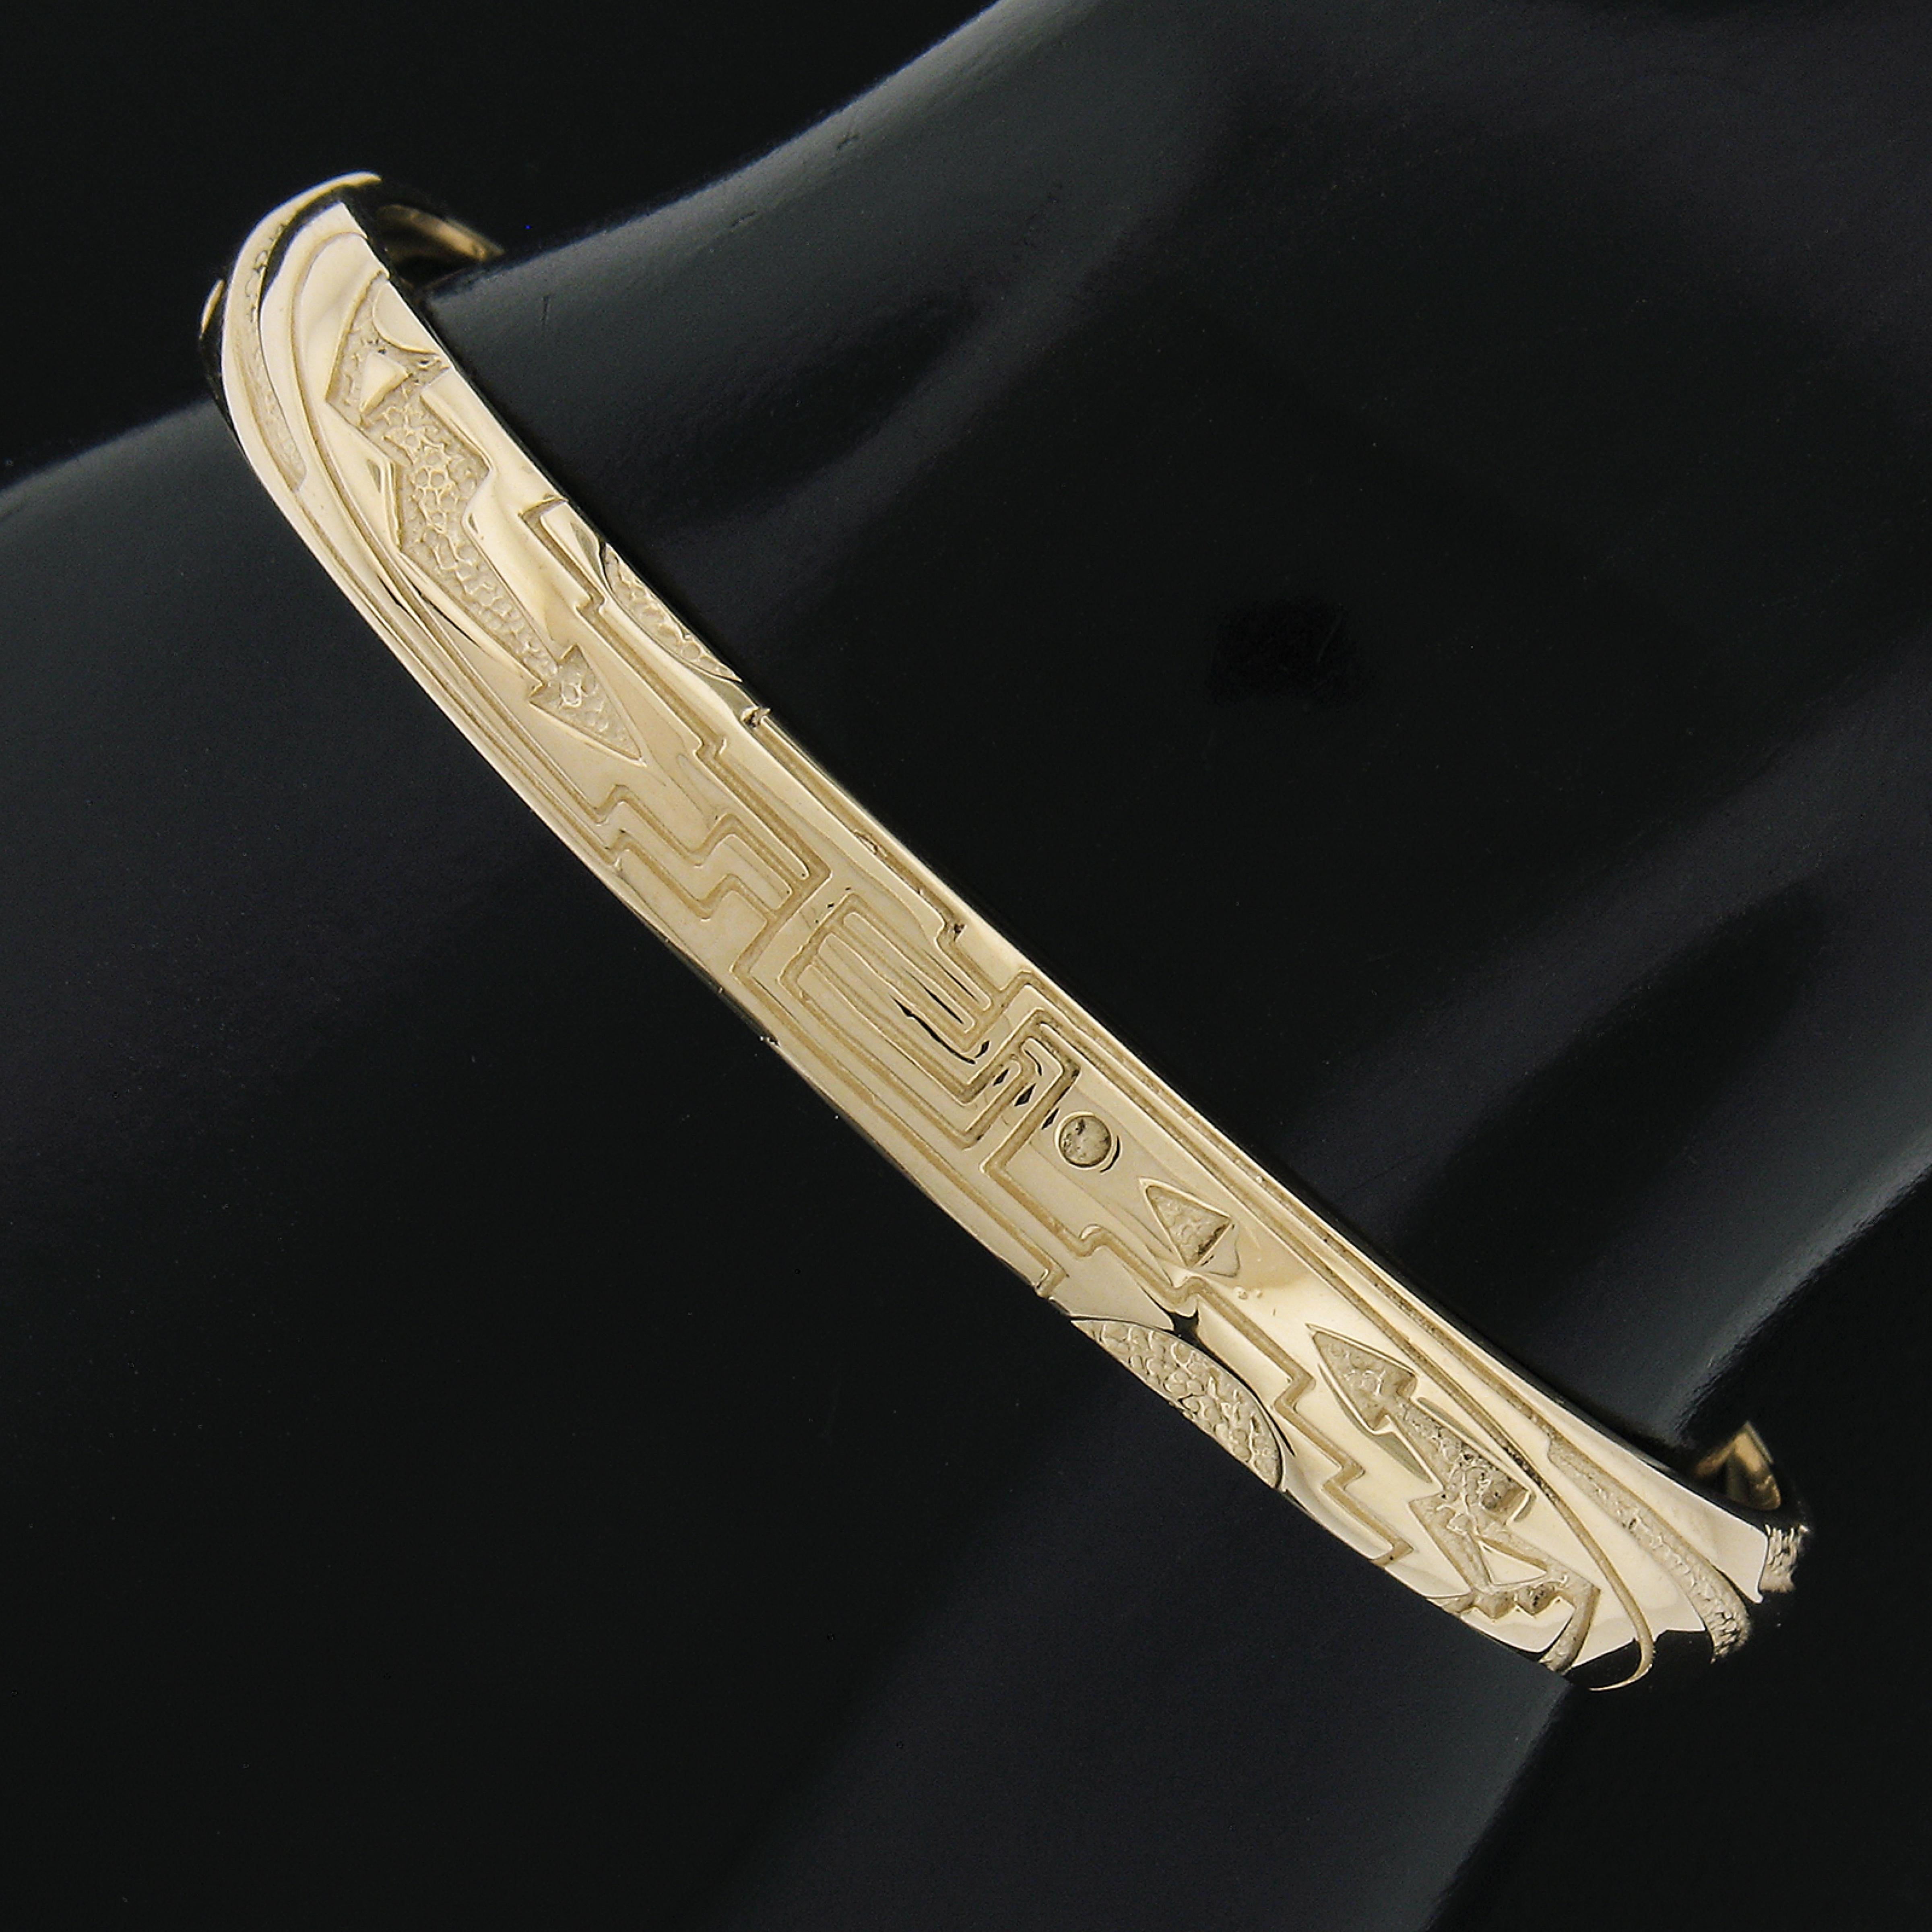 Material: Solid 14k Yellow Gold
Weight: 18.5 Grams
Chain Type: Textured Native American Design Open Cuff
Length: Will fit up to a 6.5 inch wrist.
Clasp: No Clasp
Width: 6.9mm (0.27